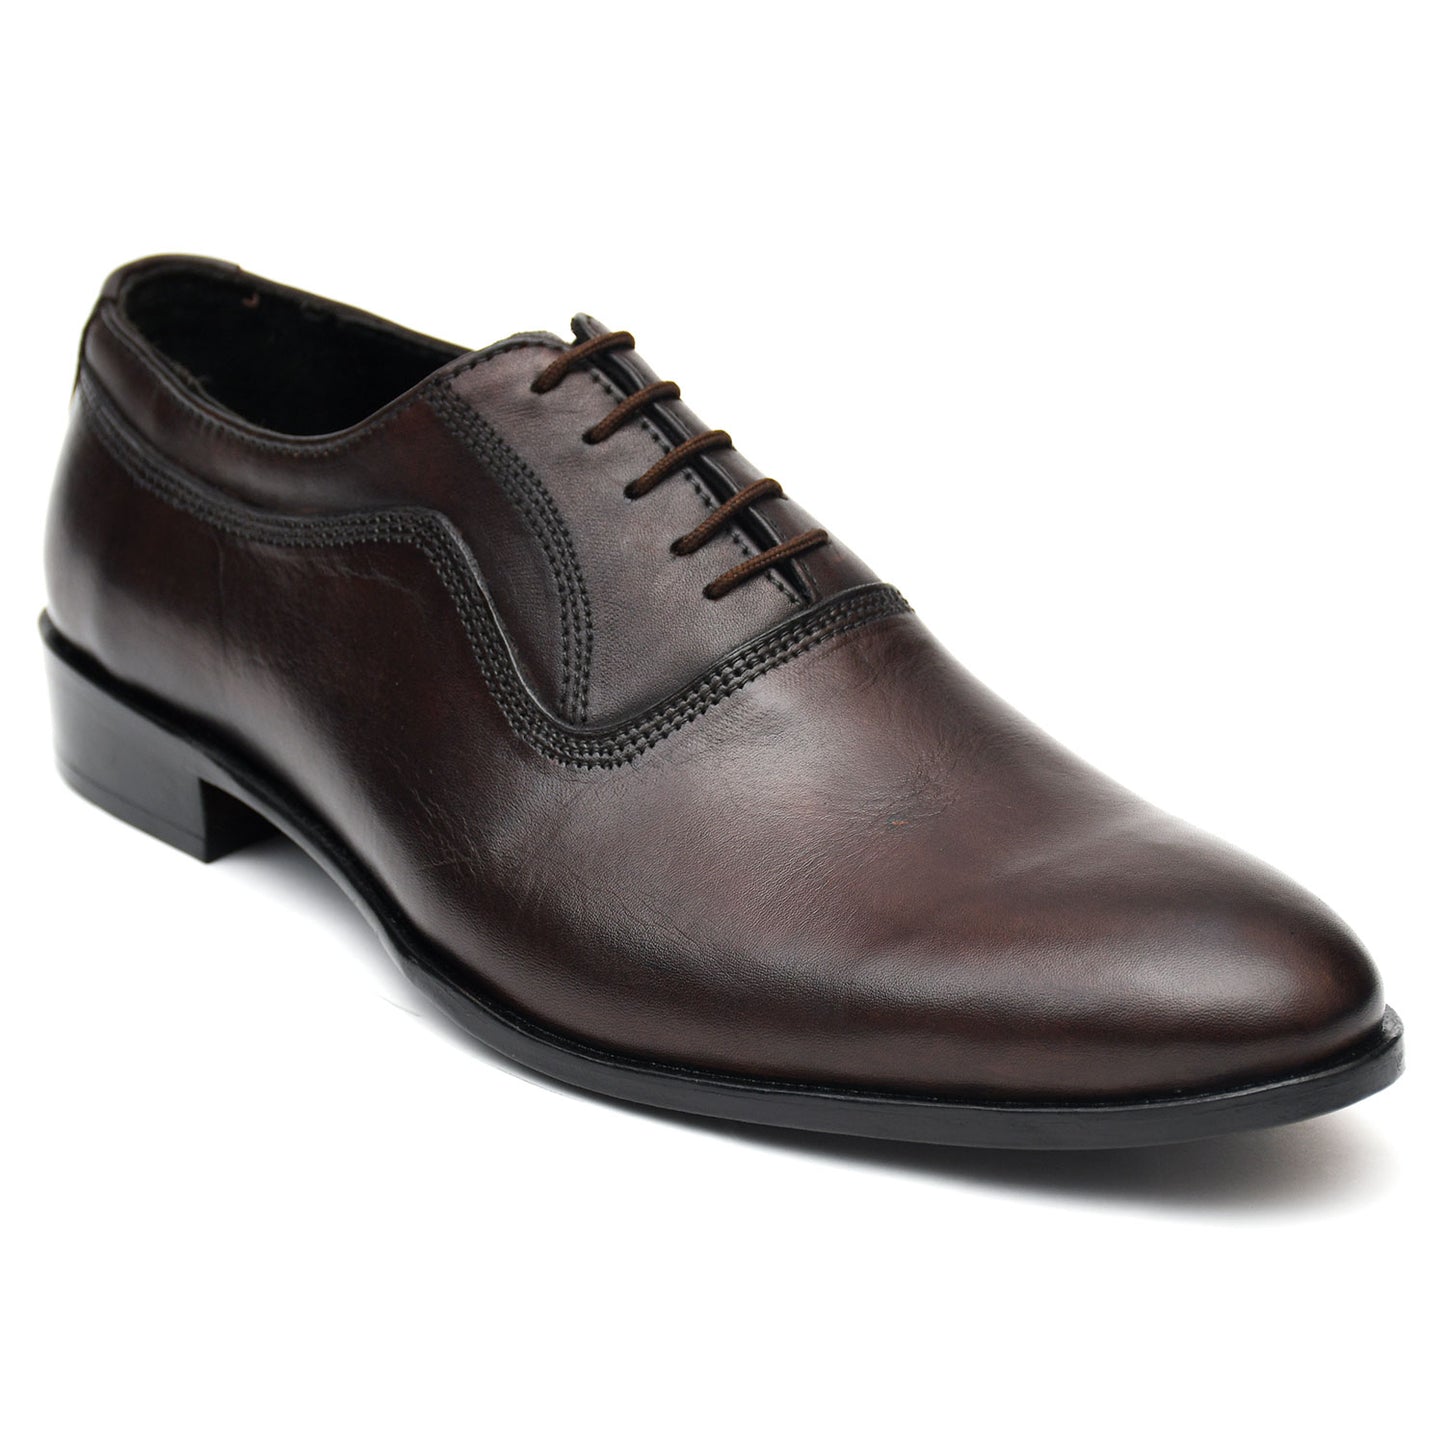 Whole-cut chocolate brown Oxford